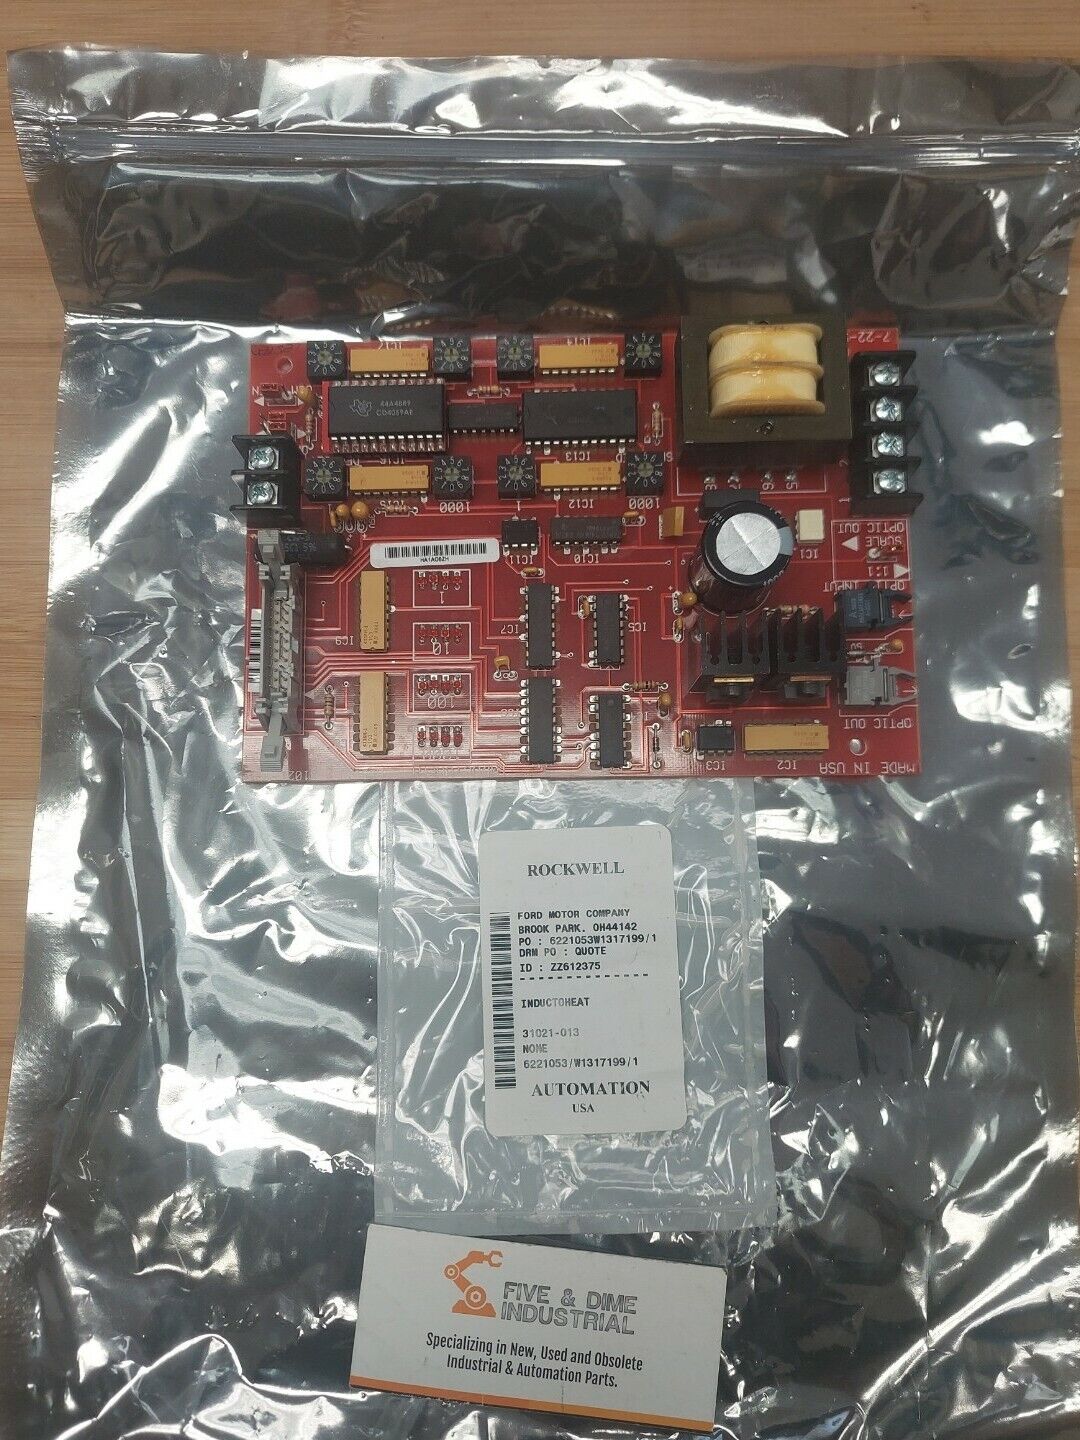 Rockwell INDUCTOHEAT CONTROL BOARD 31021-013 (CB102)